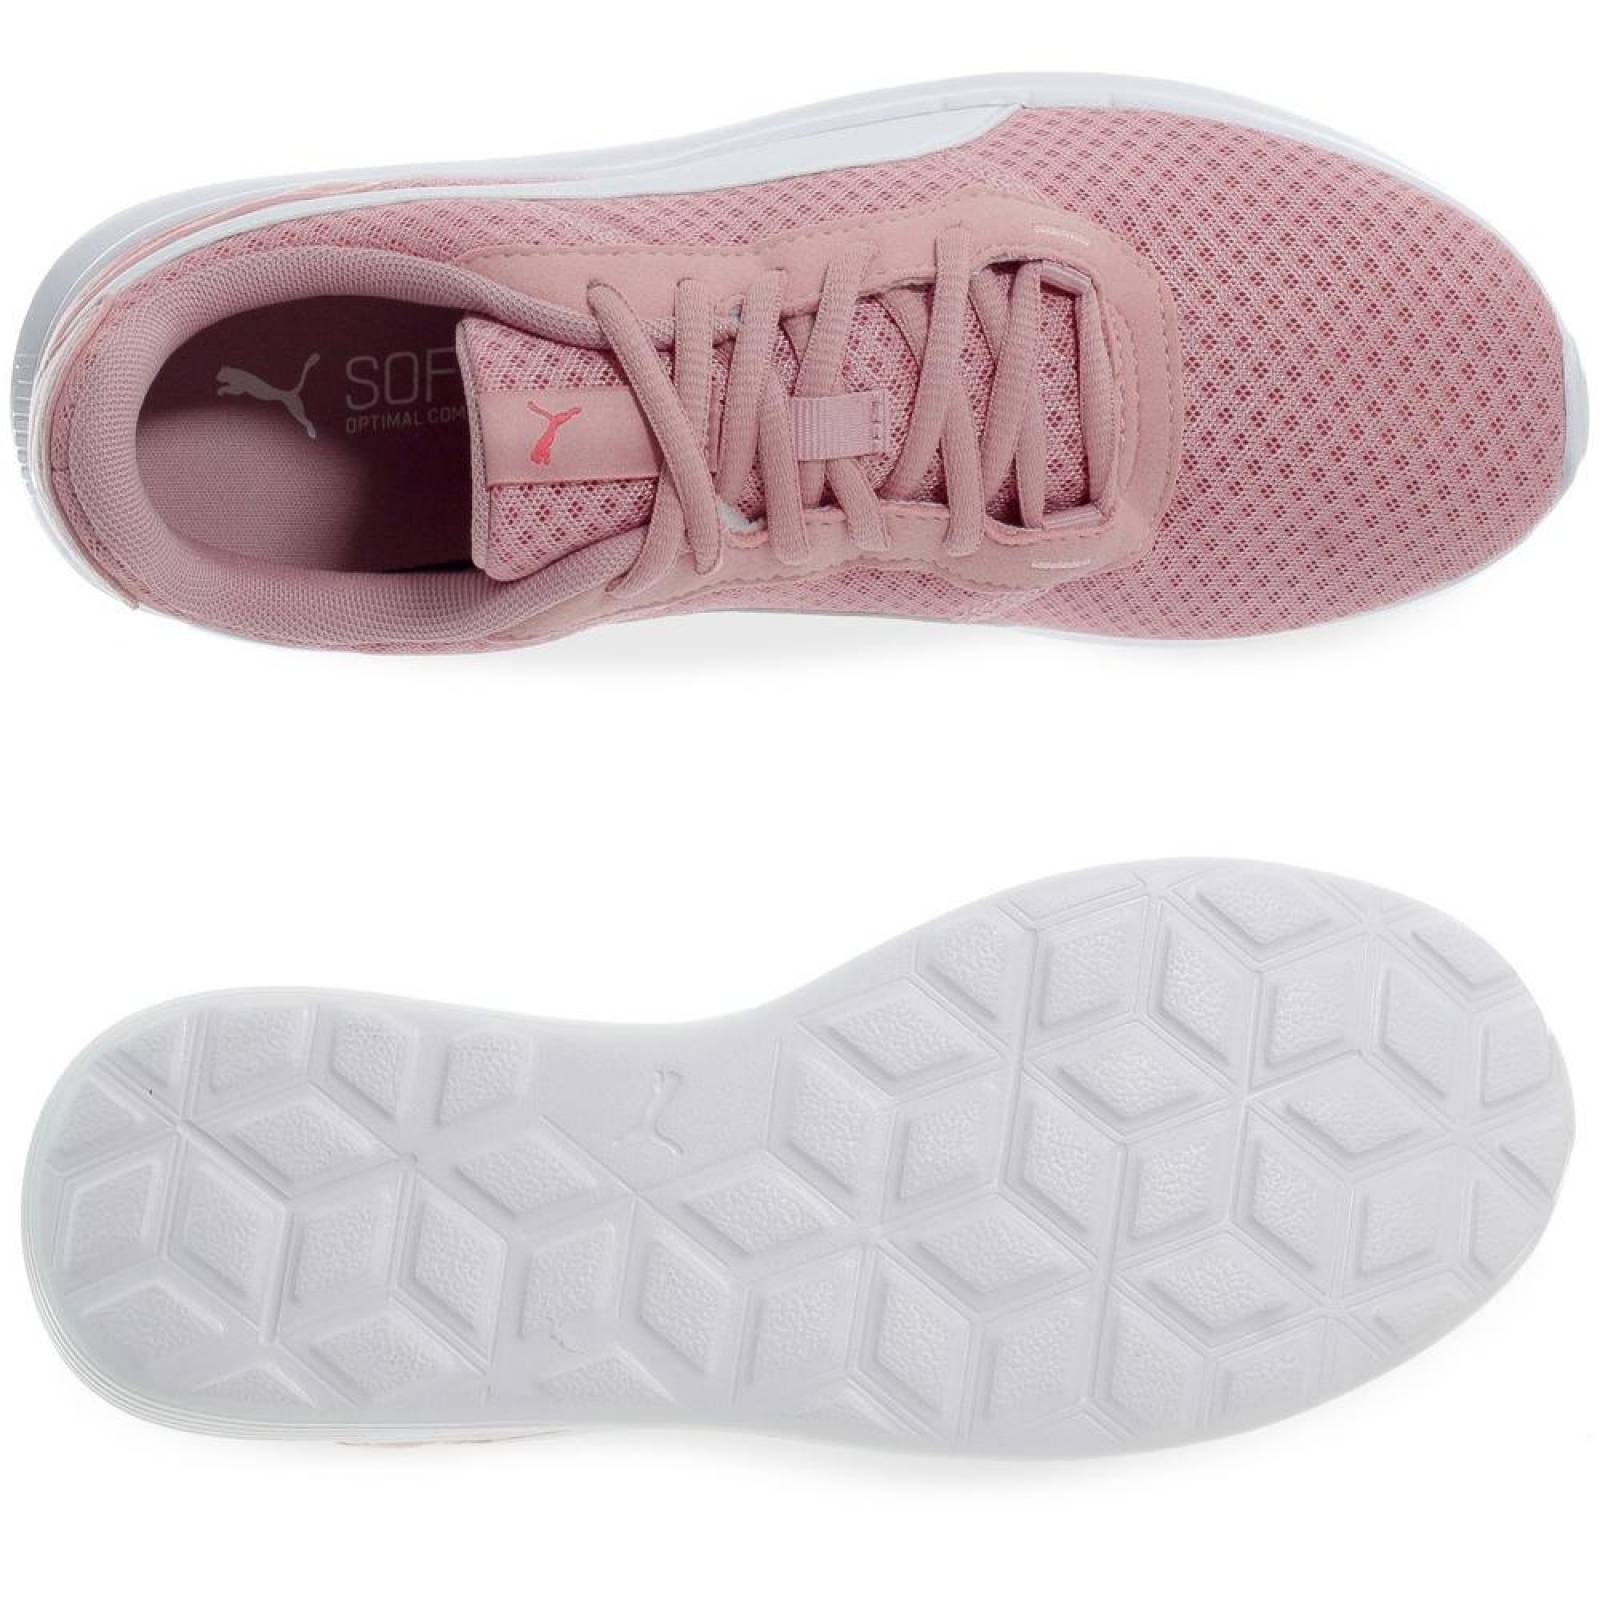 Tenis Puma ST Activate - 36912210 - Rosa - Mujer 